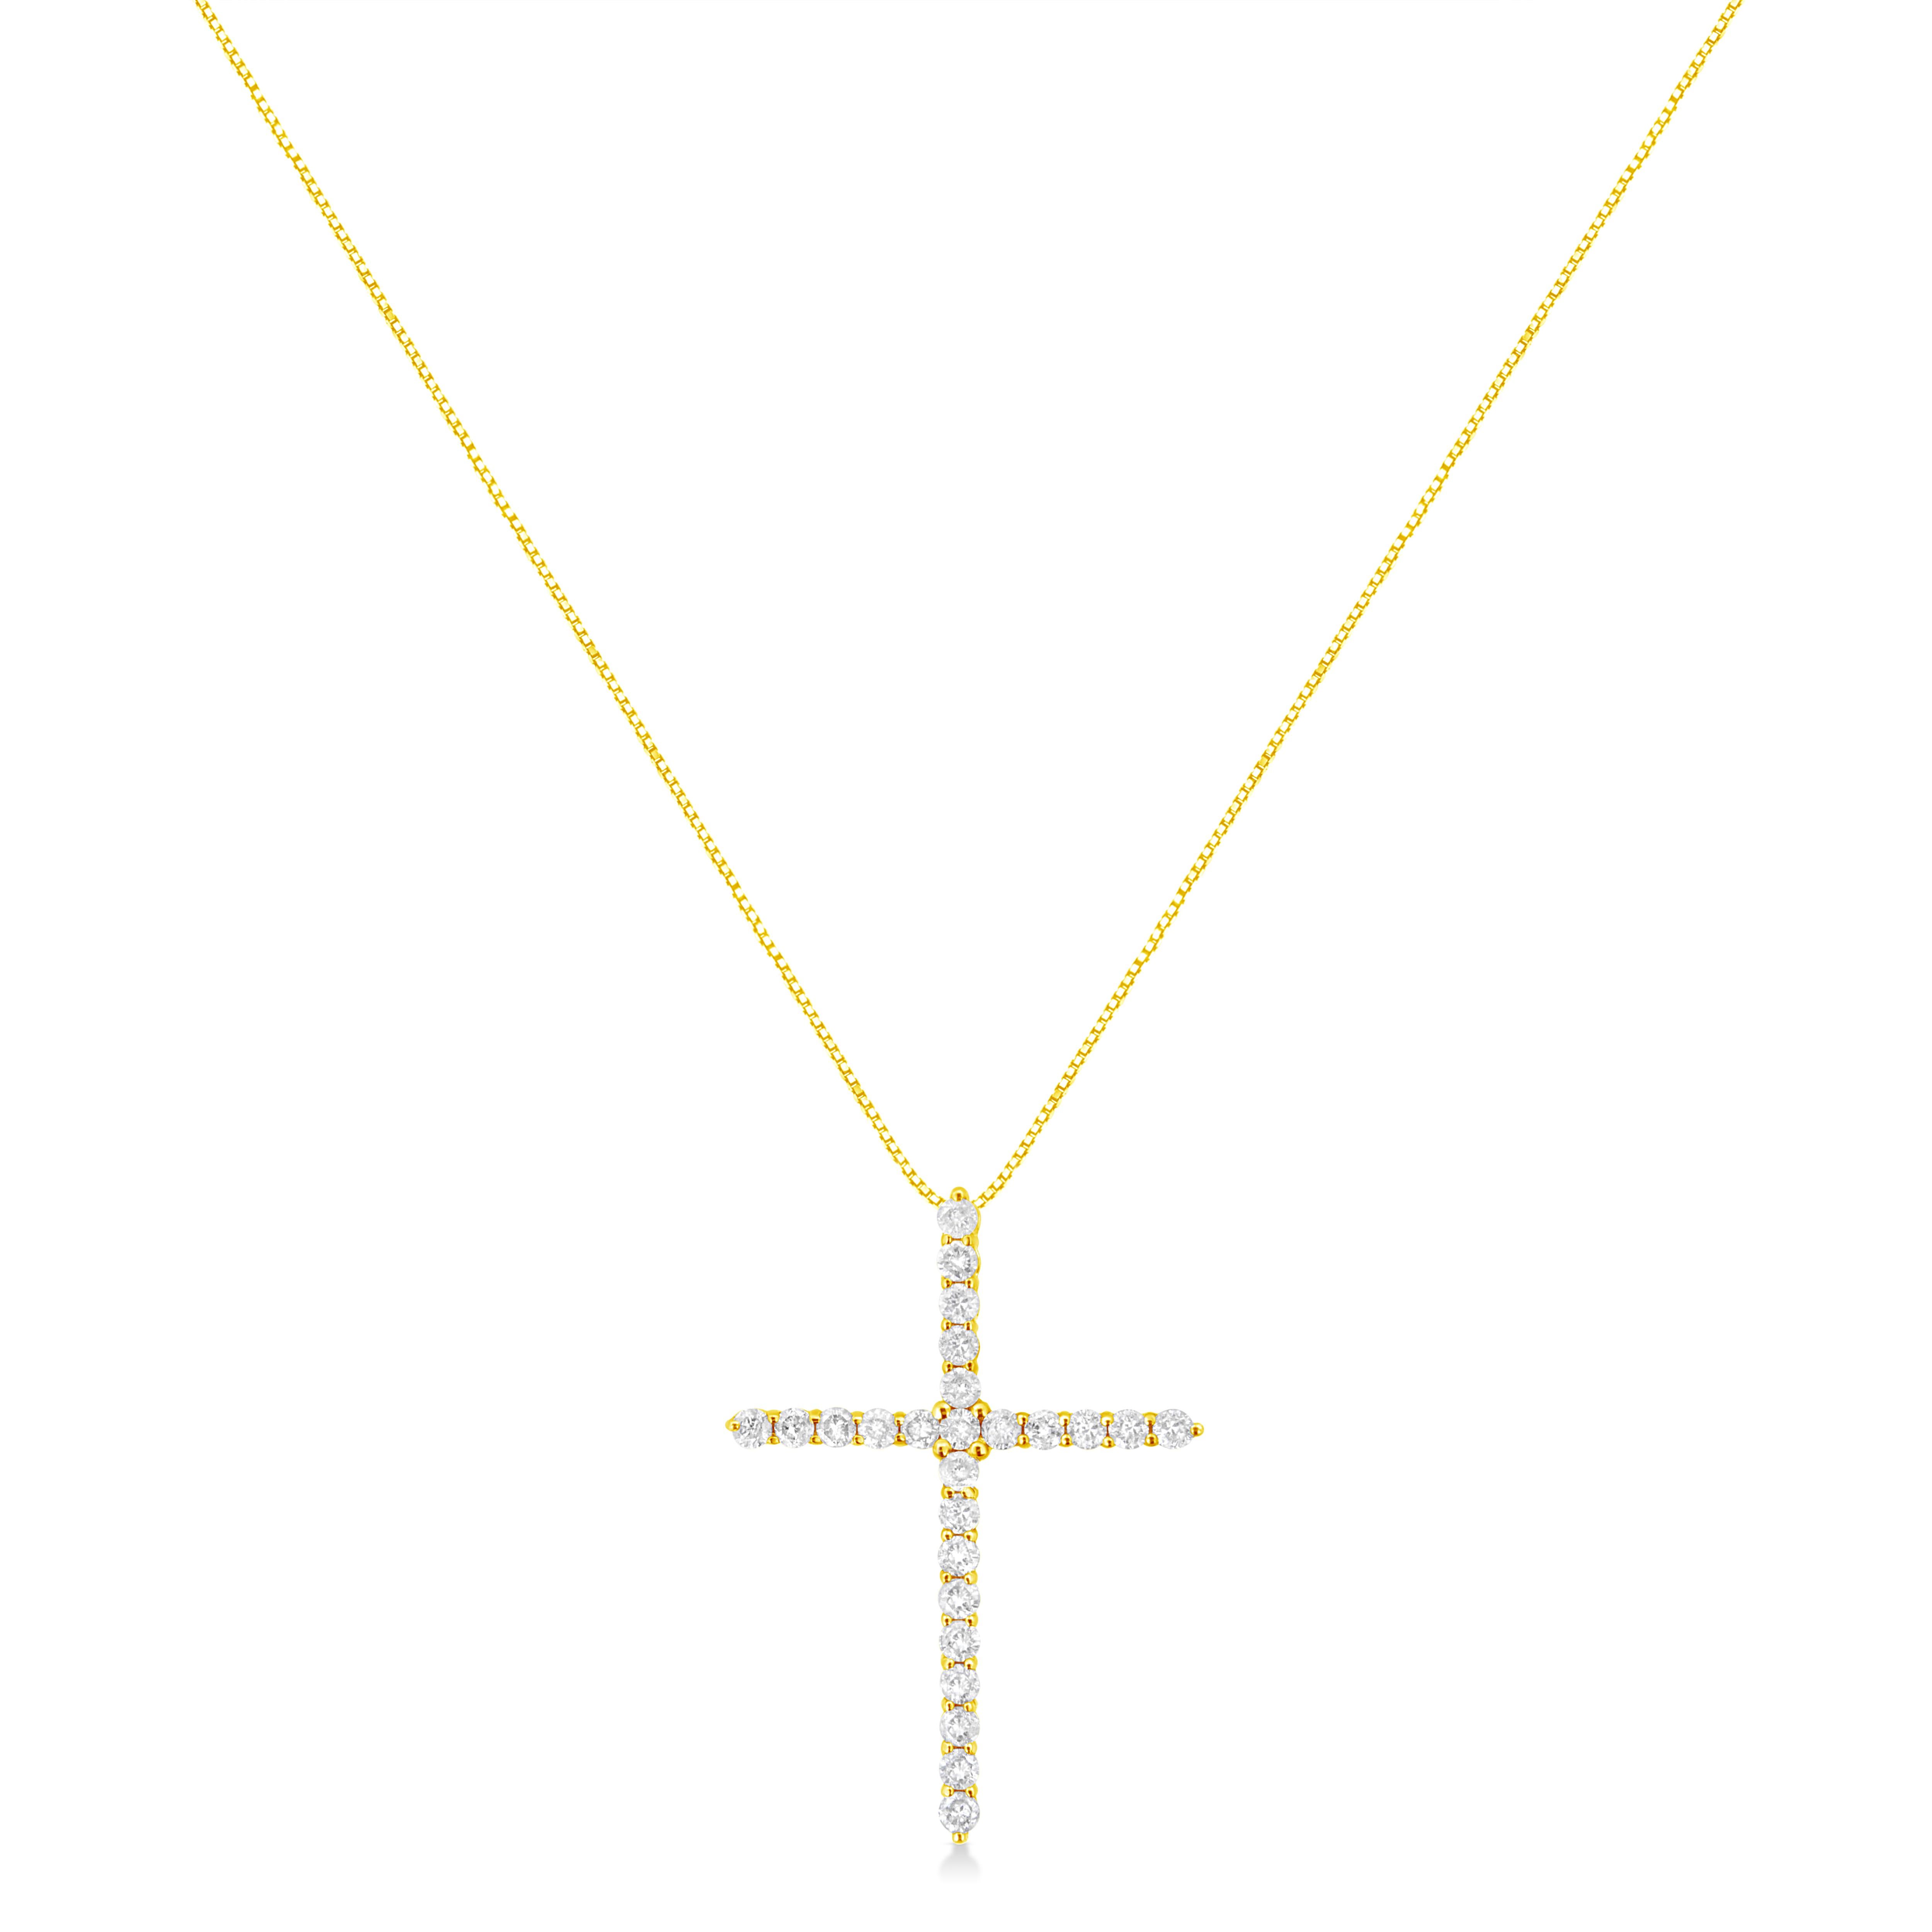 Share your faith with this stunning diamond cross pendant necklace. This cherished cross necklace for her, features 25 natural, round-cut diamonds set in 10k Yellow Gold Plated Sterling Silver. The pendant is suspended from an 18-inch box chain with